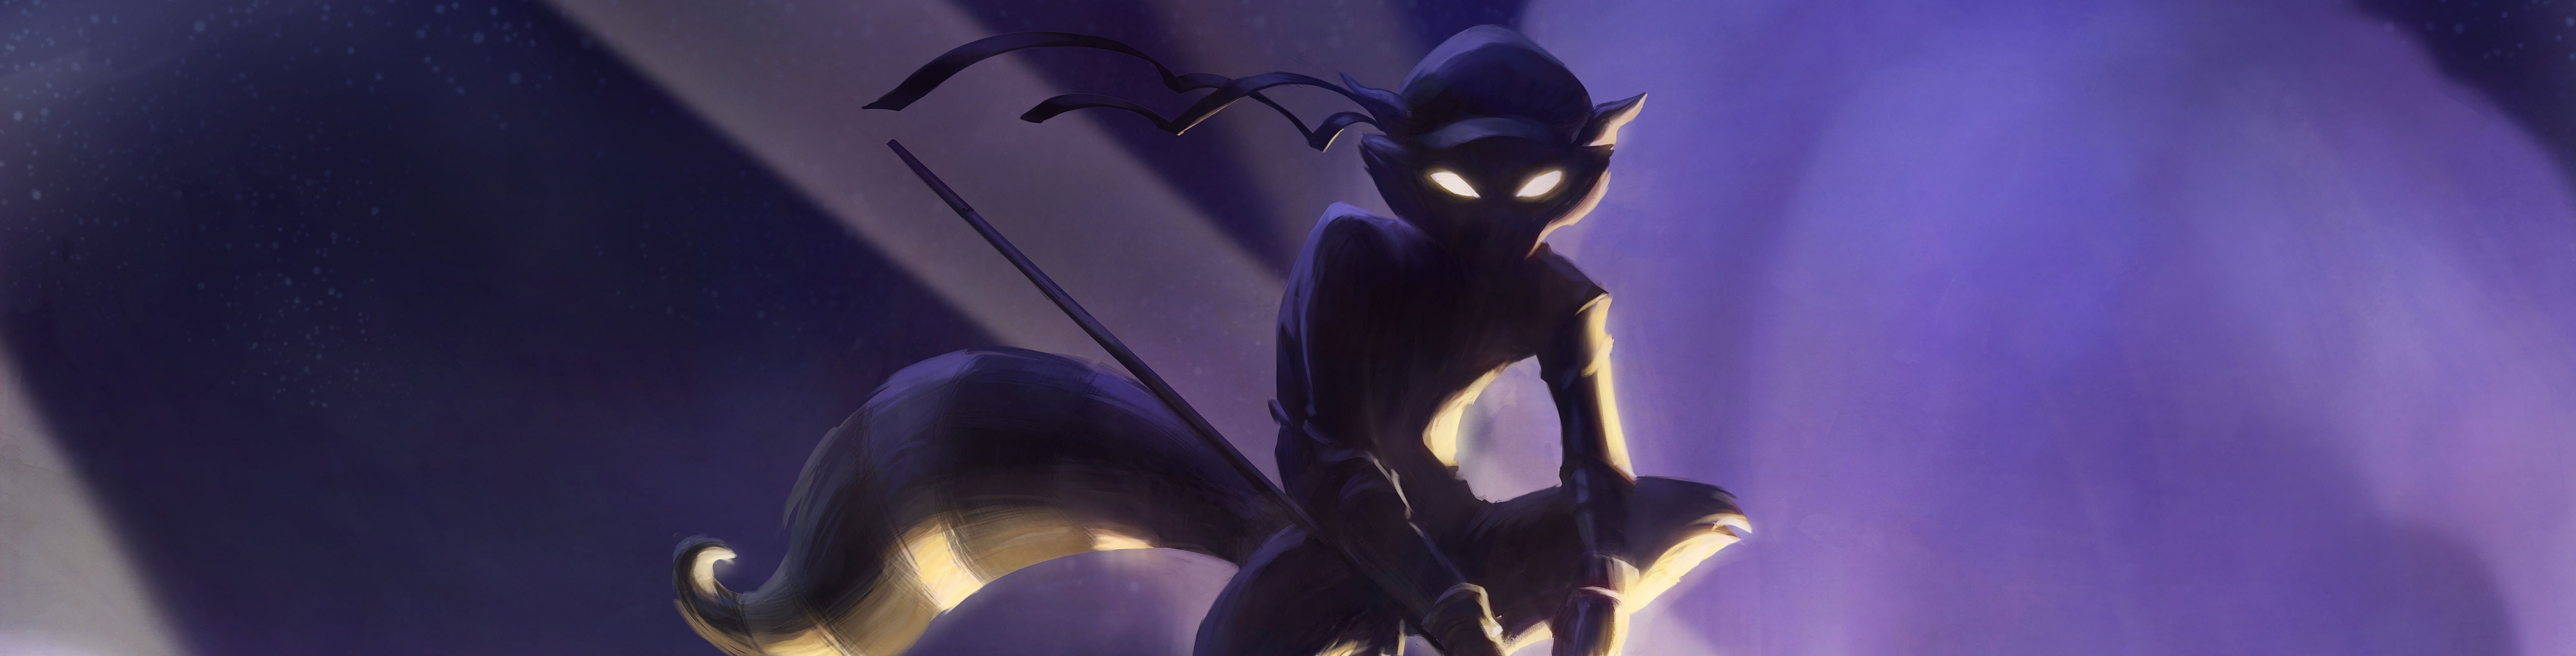 Imagem para Sly Cooper: Thieves in Time - Análise